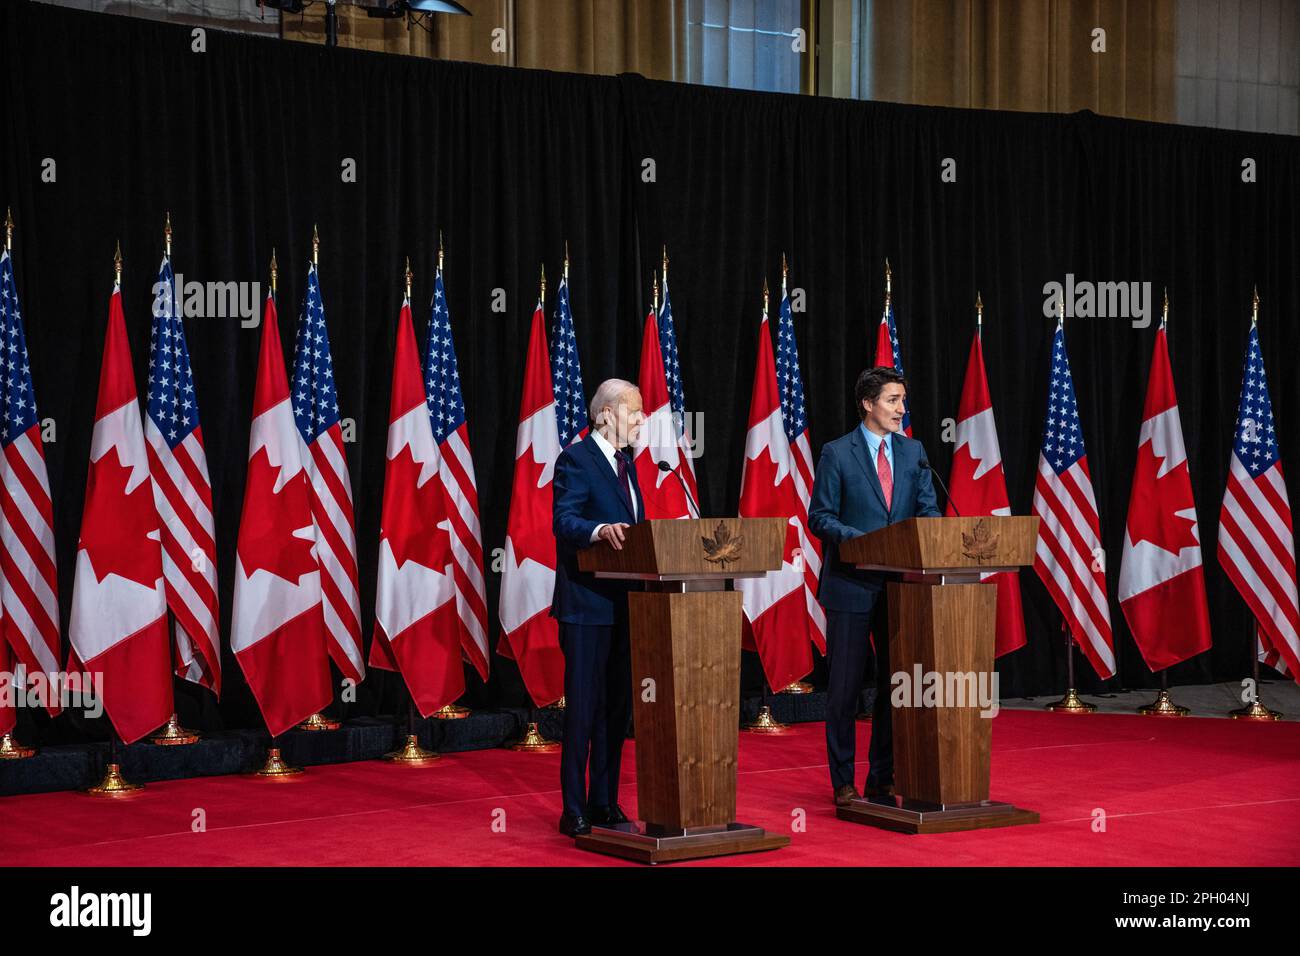 Ottawa, Canada. 24th Mar, 2023. U.S. President Joe Biden speaks during a joint press conference with Canadian Prime Minister Justin Trudeau at the Sir John A. Macdonald Building in Ottawa. This is the first official visit that the American president has made to Canada since becoming president. Though visits between elected presidents and the allied country typically take place sooner, Biden's inaugural visit to the northern neighbor was delayed due to COVID-19 travel restrictions. (Photo by Katherine KY Cheng/SOPA Images/Sipa USA) Credit: Sipa USA/Alamy Live News Stock Photo